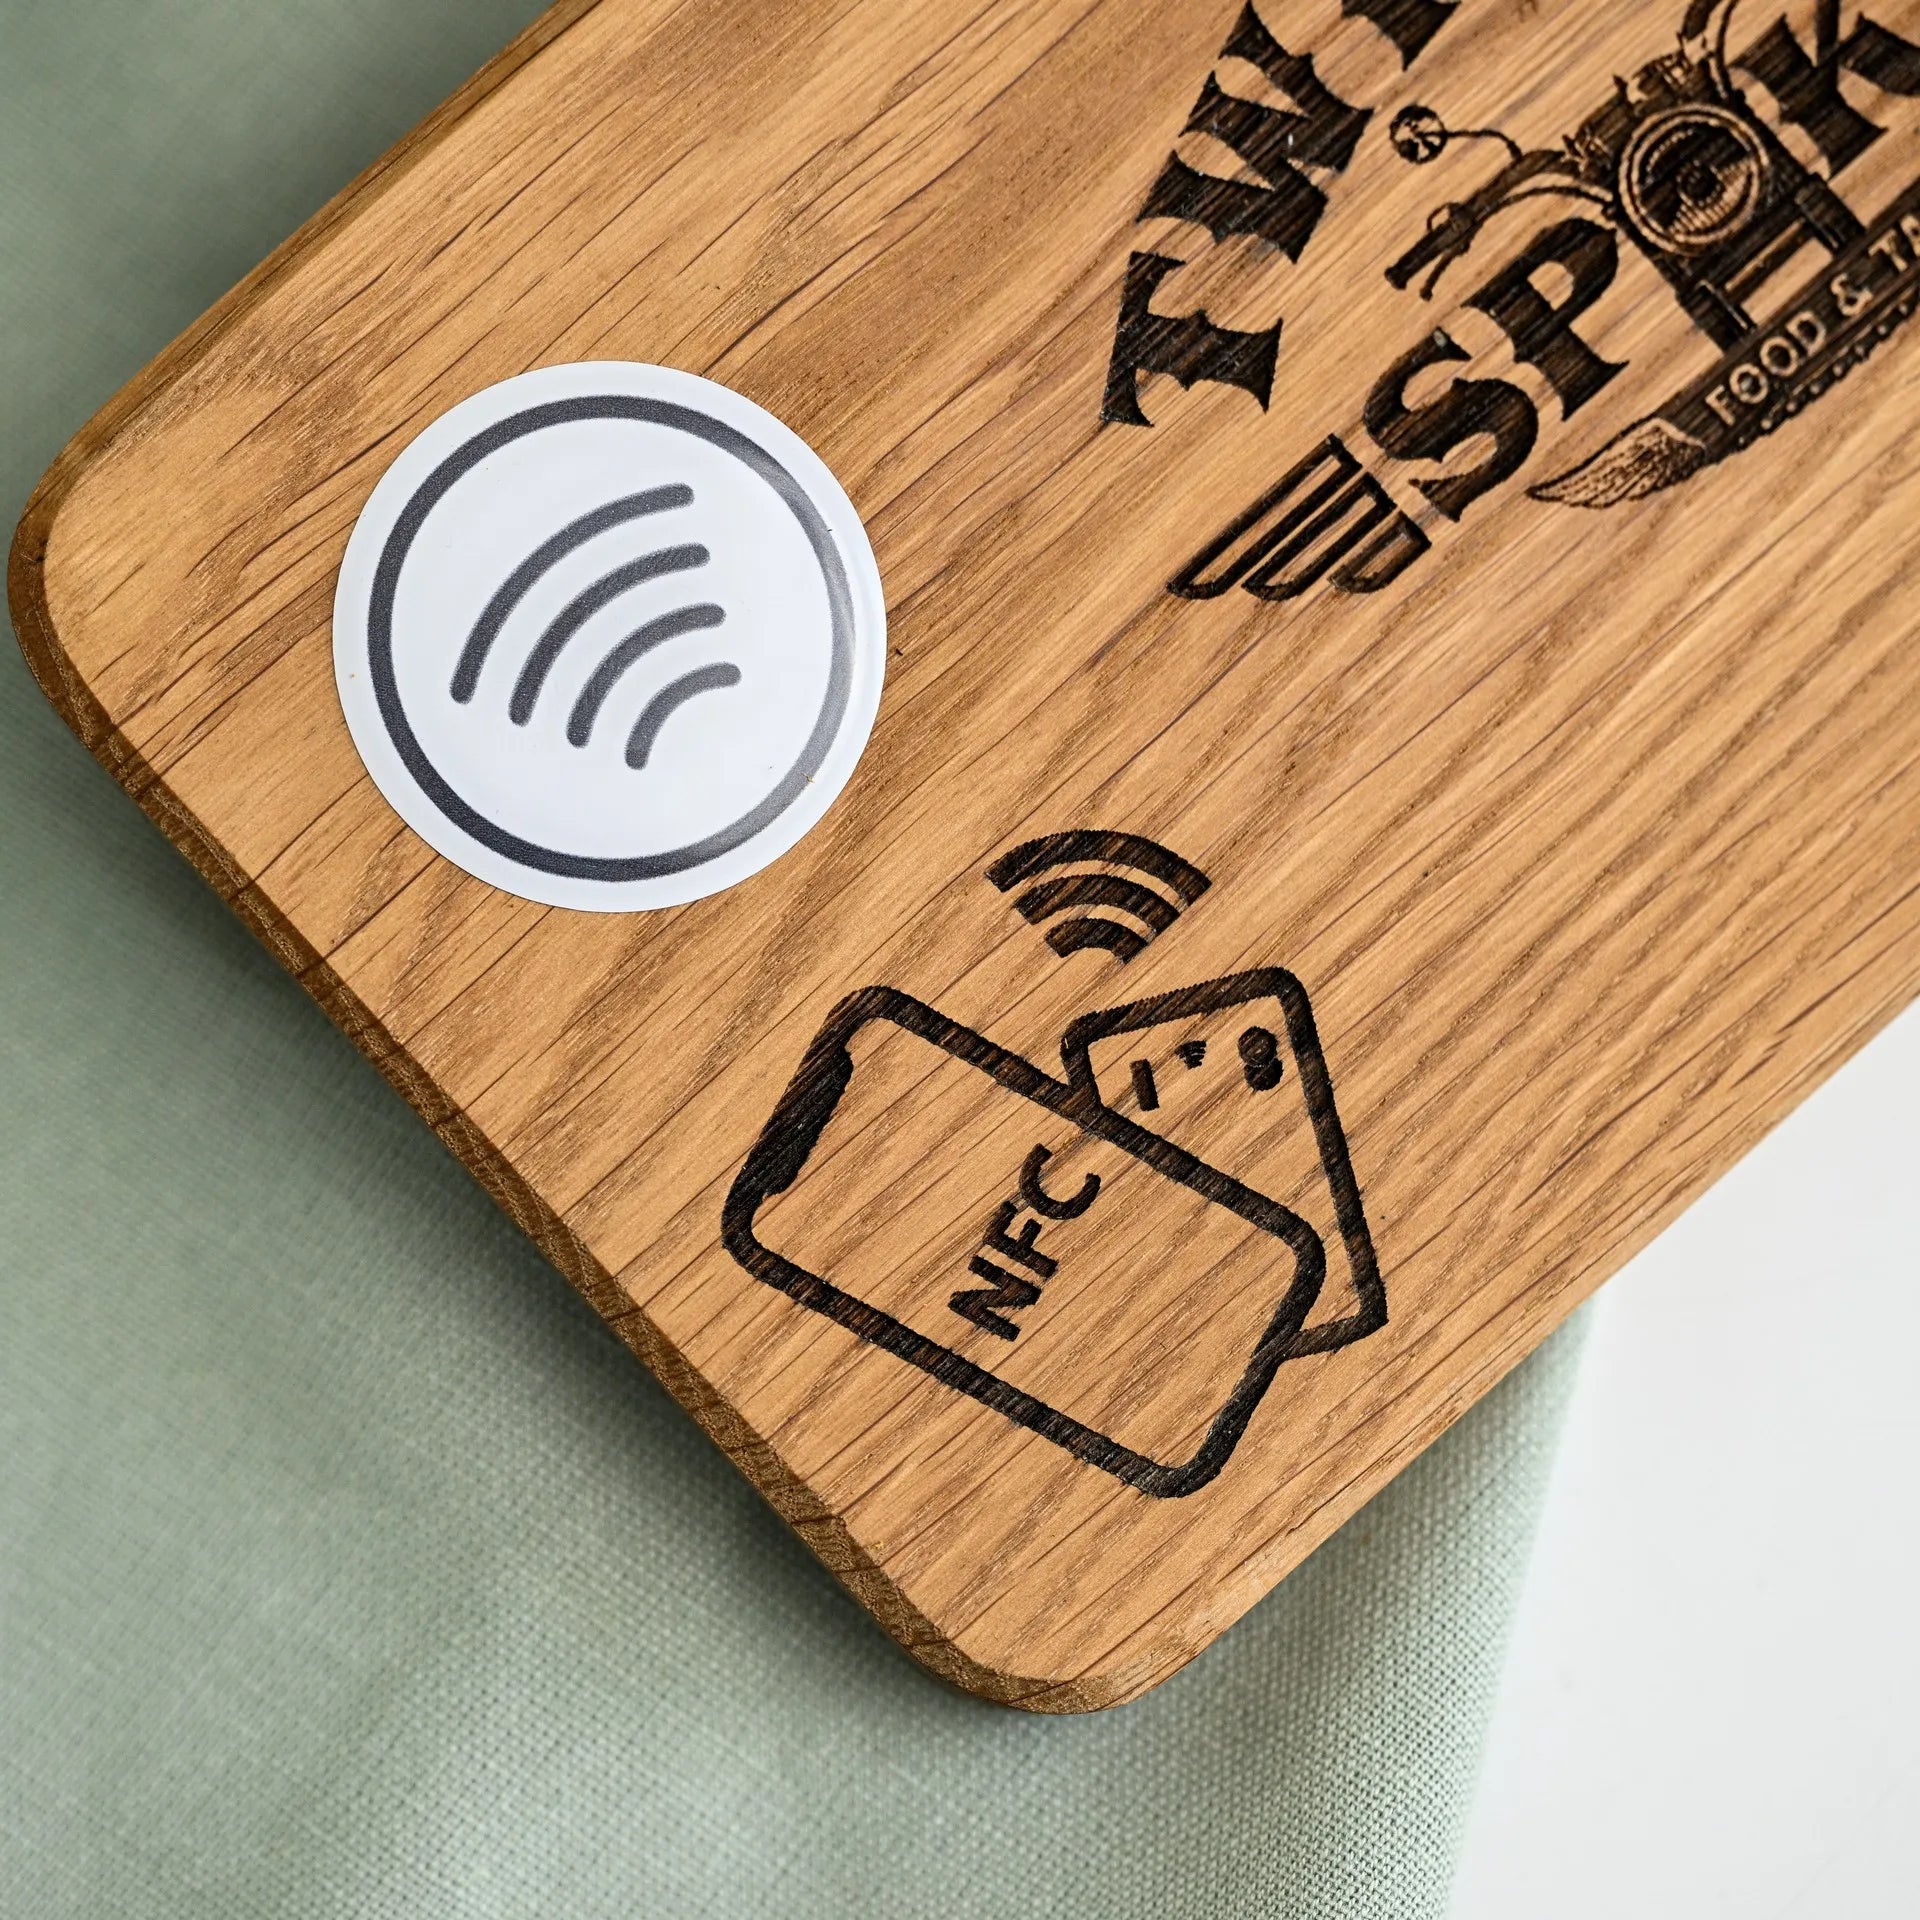 NFC tag stand with personalized logo engraving, perfect for modernizing your restaurant's payment system